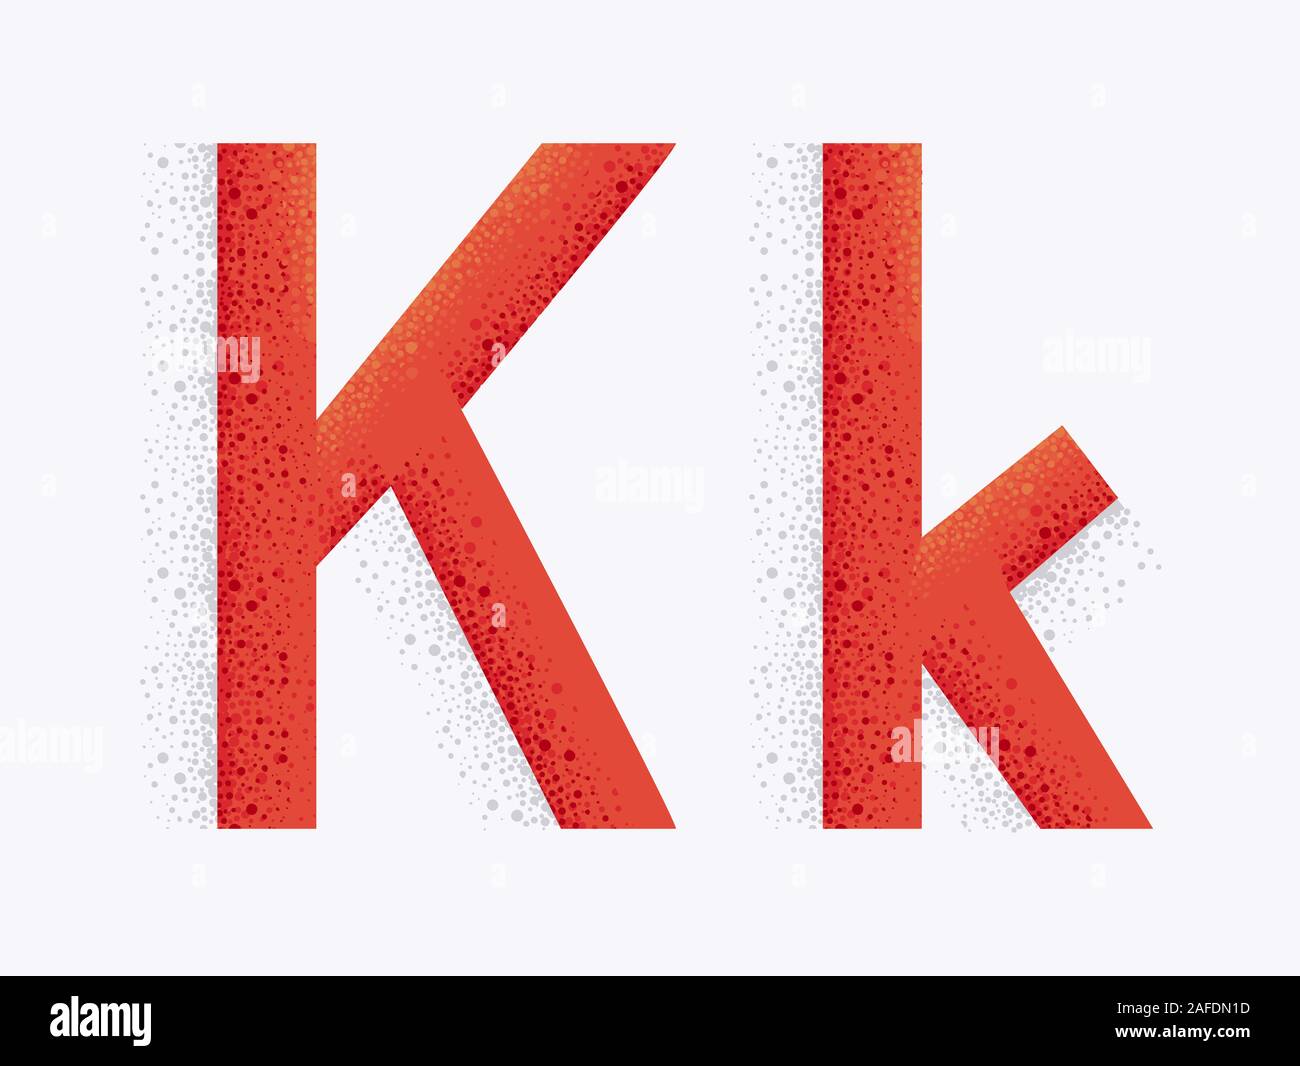 Illustration of Decorative Alphabet with Capital and Small Letter K and Dust Particle Effect